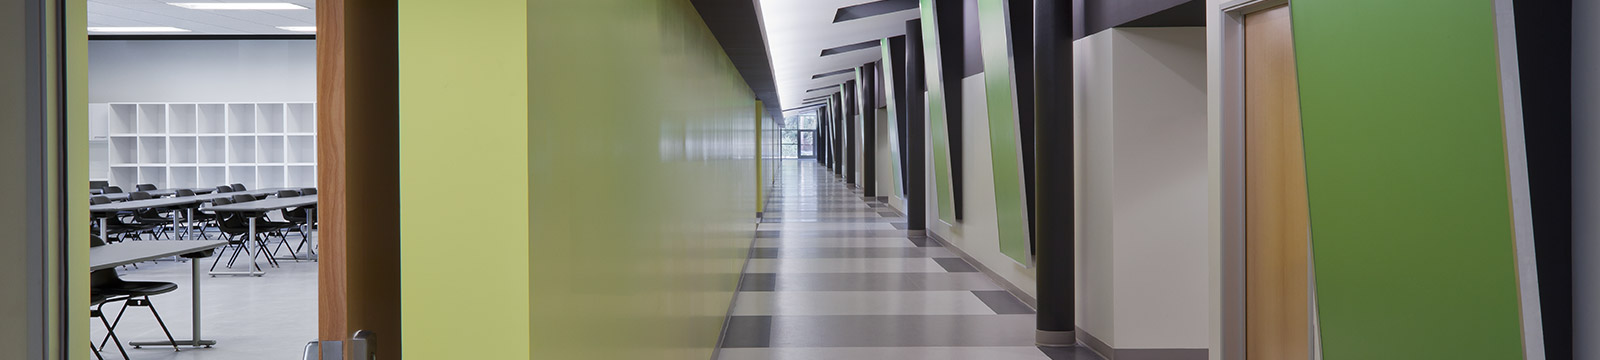 An image of a large empty classroom hallway with a green, gray and white color combination.